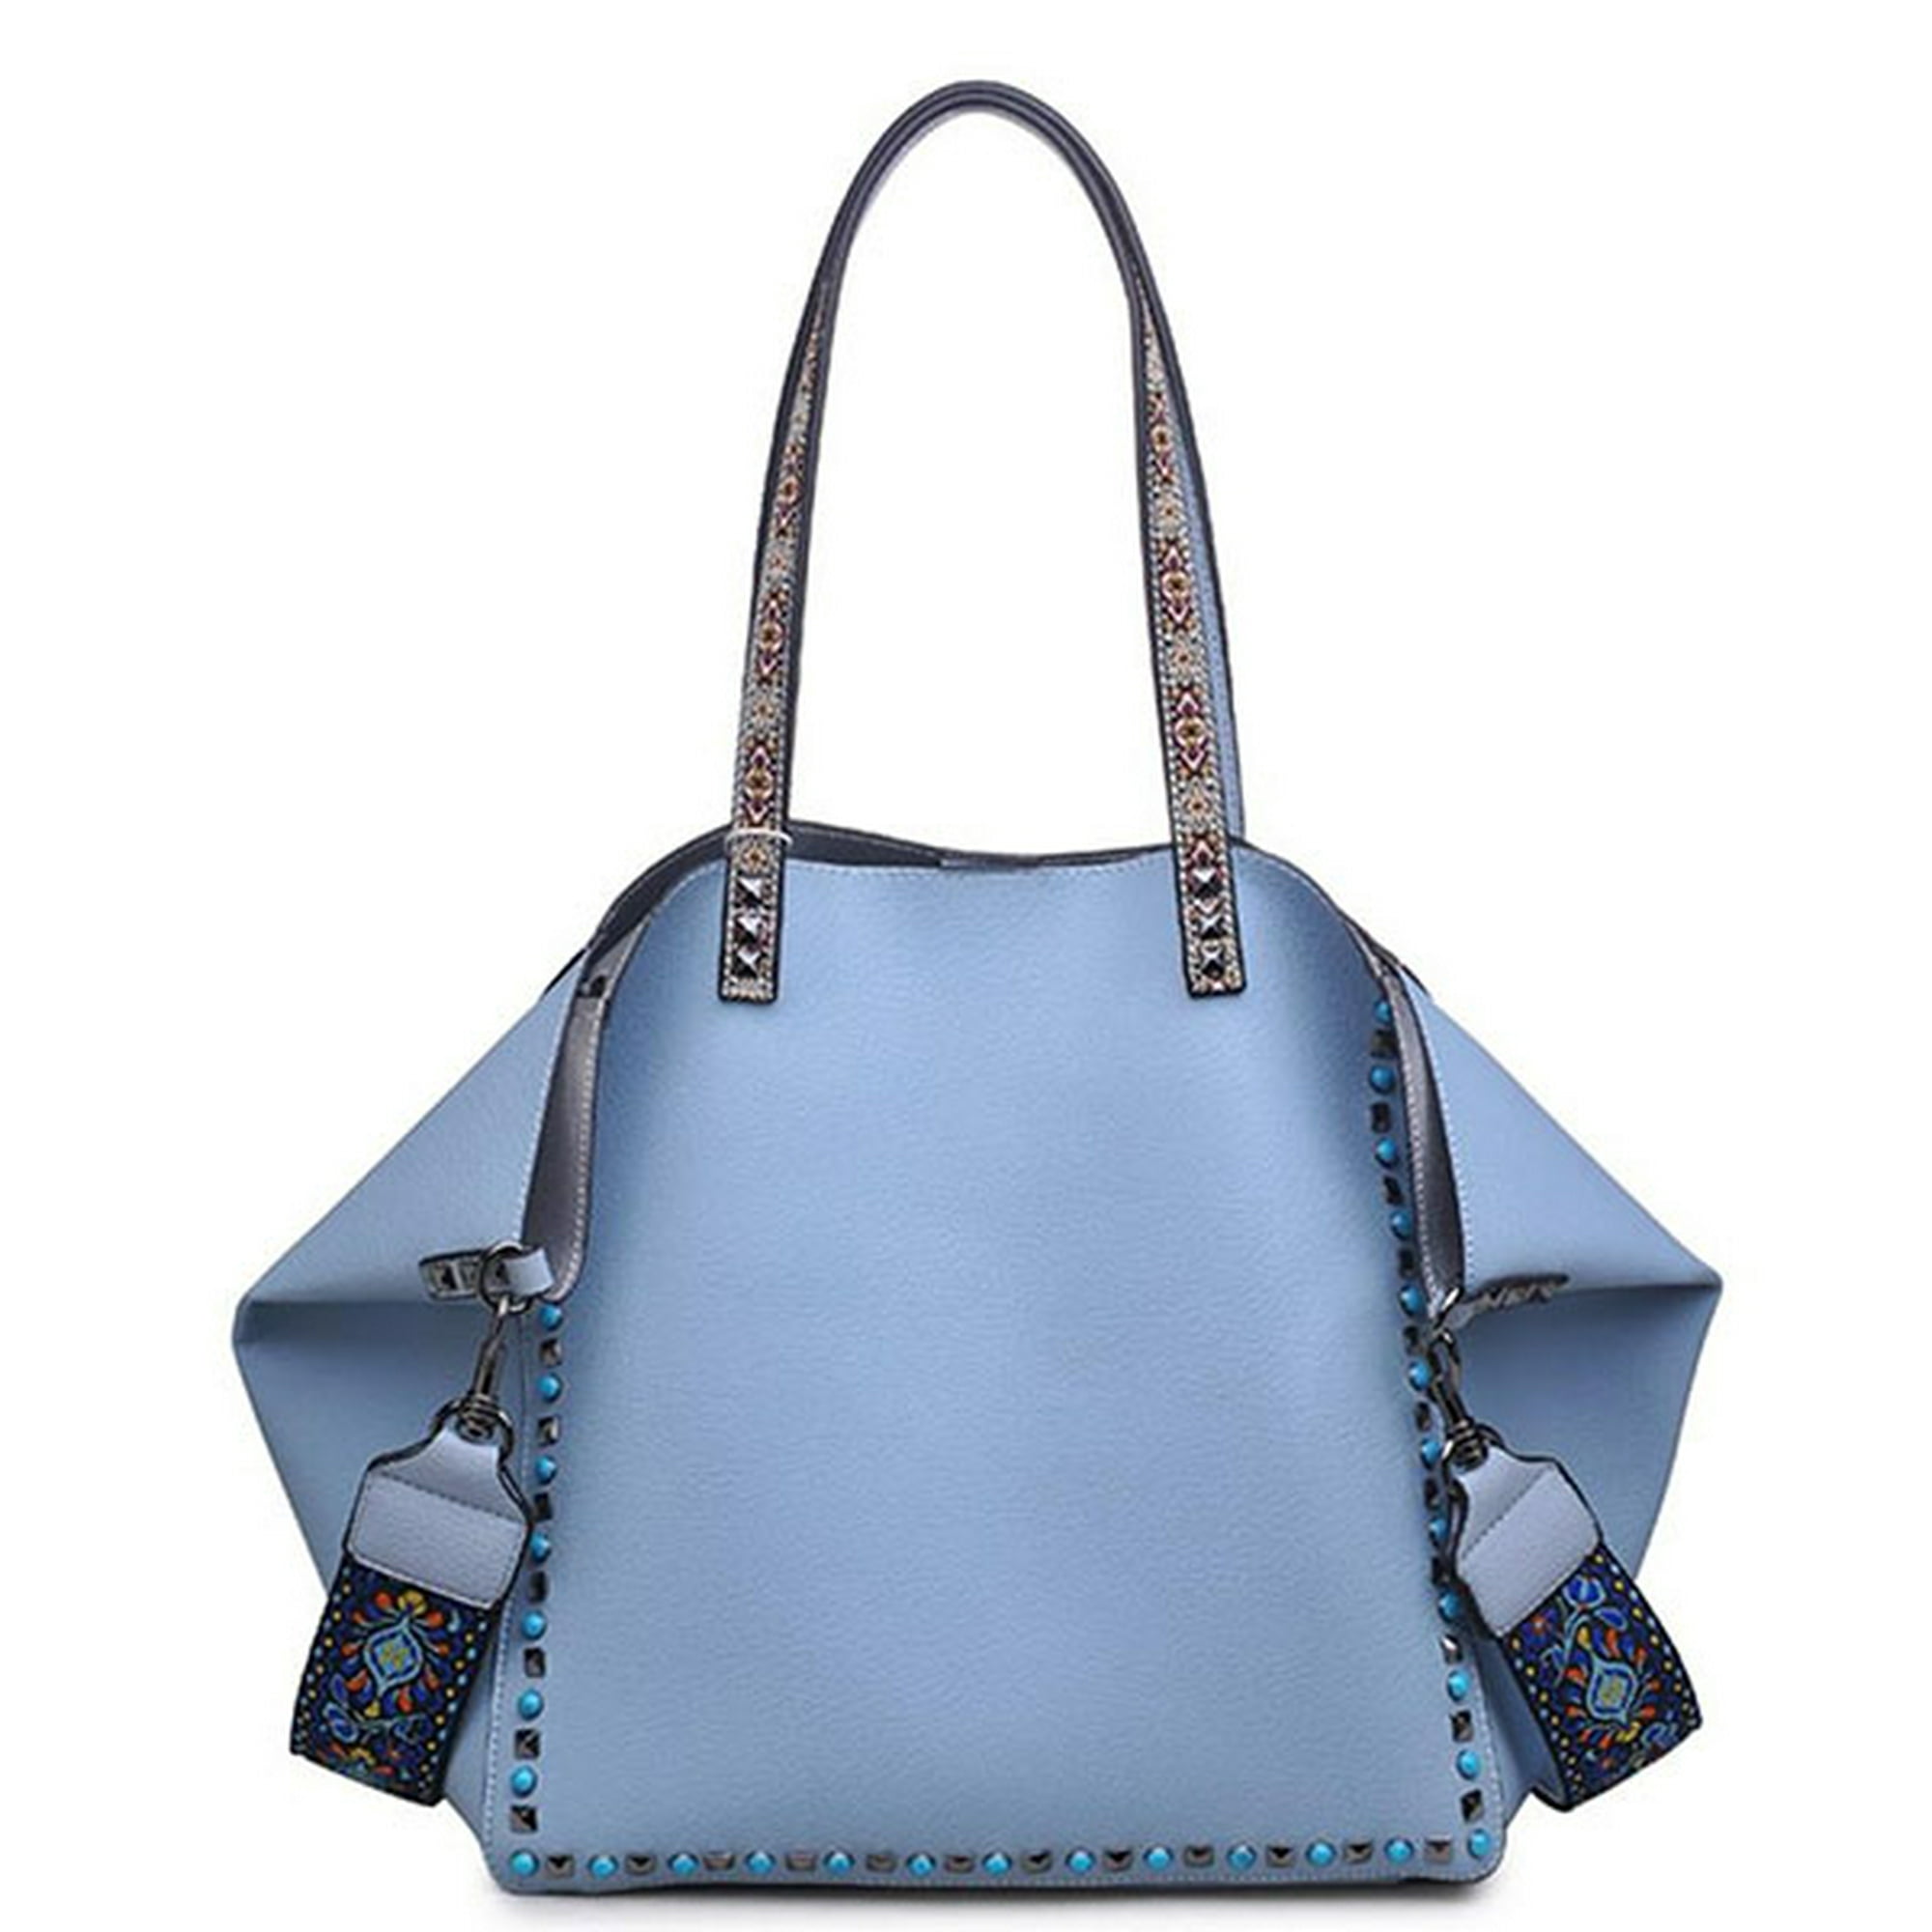 Urban Expressions Vegan Leather Satchel Purse - Women's Bags in